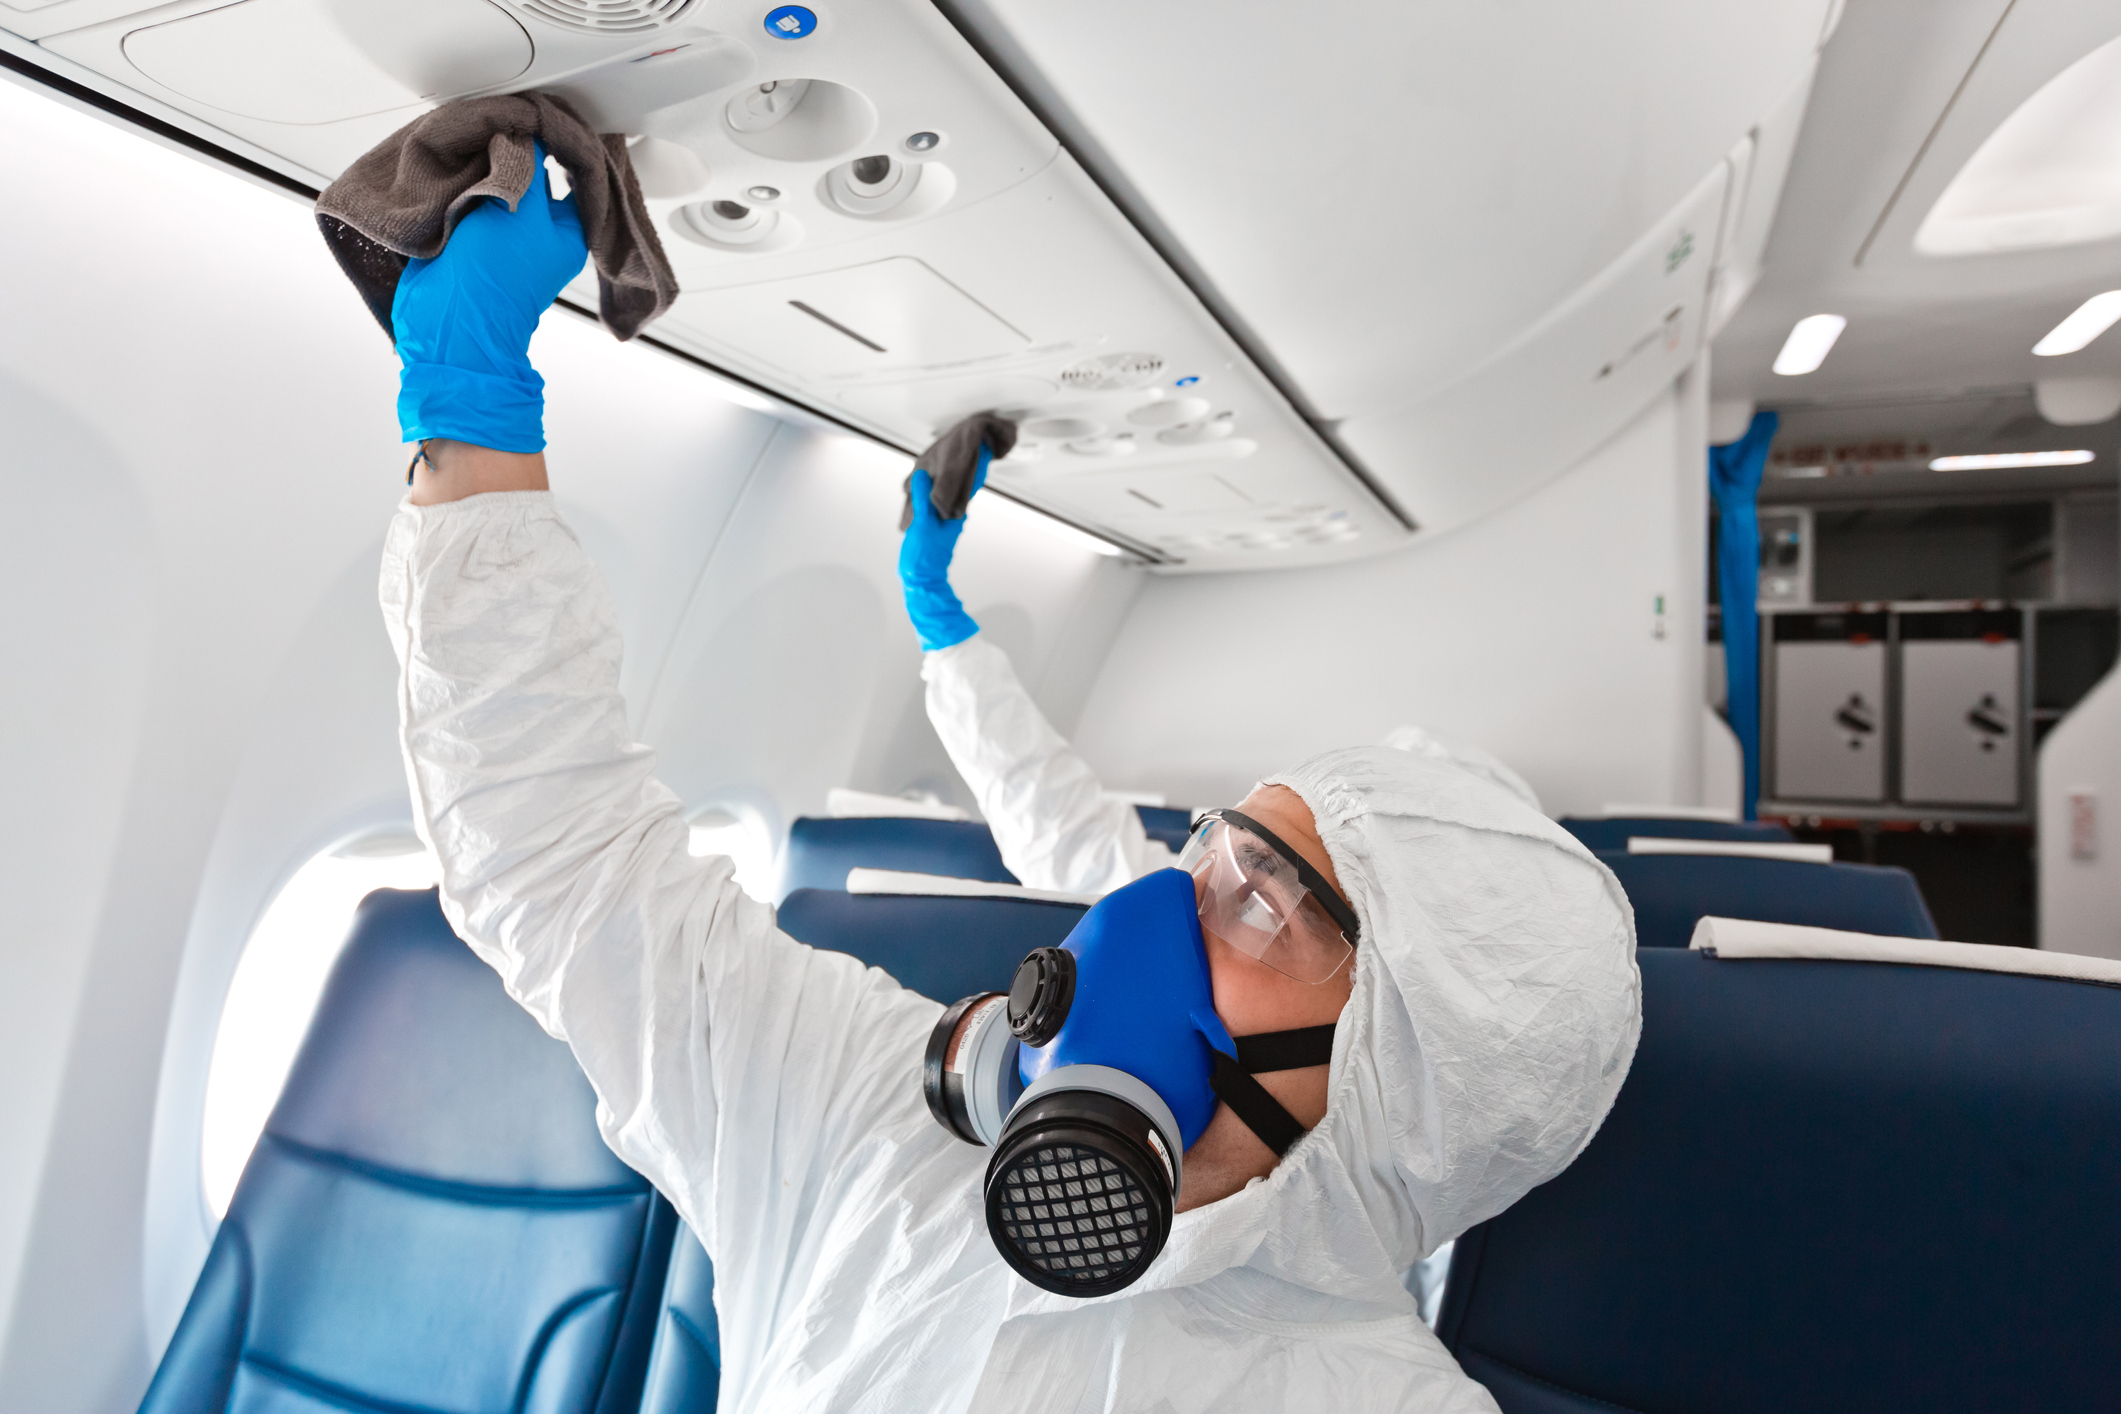 Aircraft cleaning in a protective suit